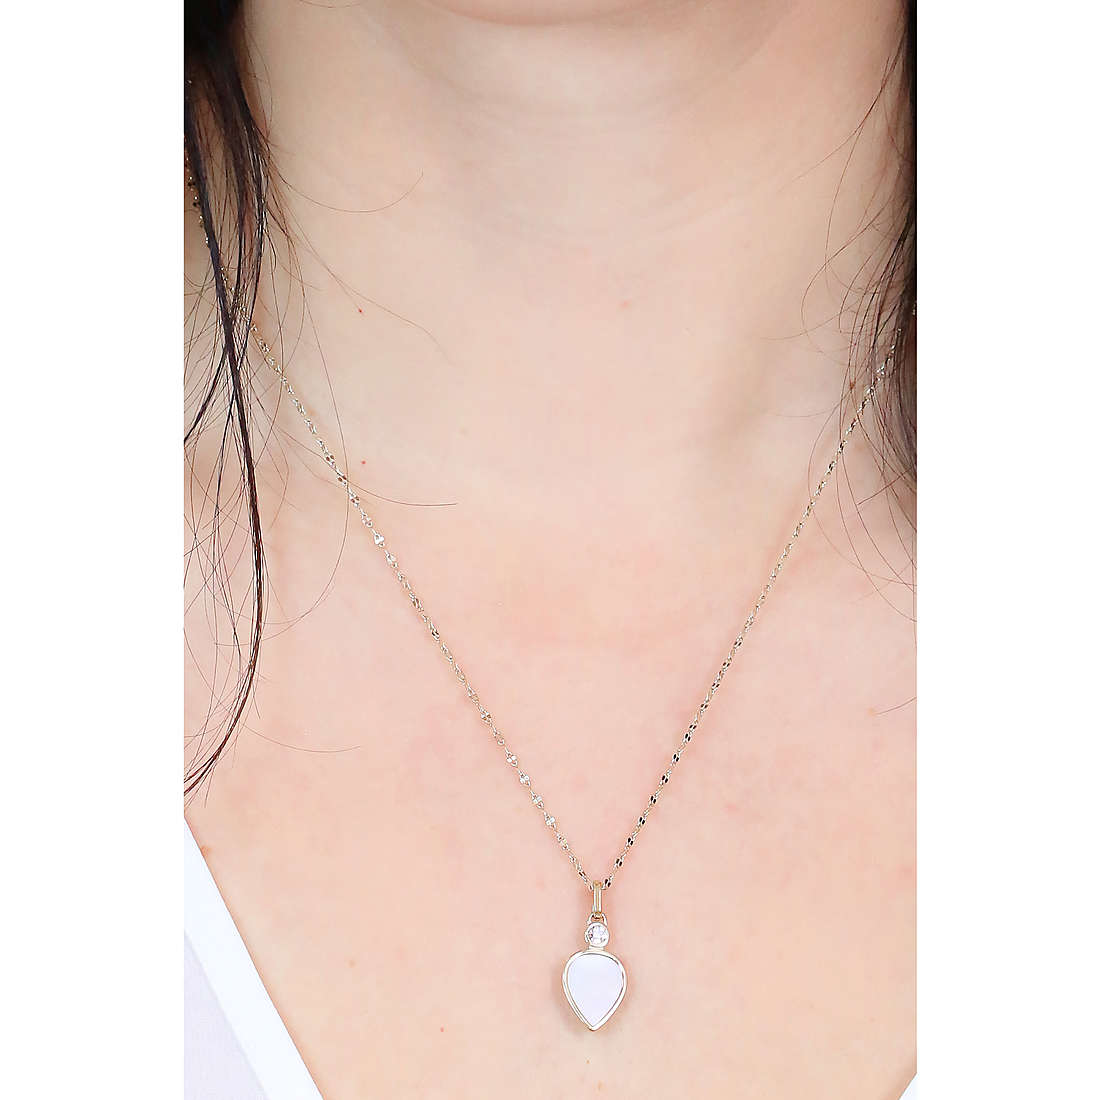 Fossil necklaces Jewelry woman JF04248710 wearing